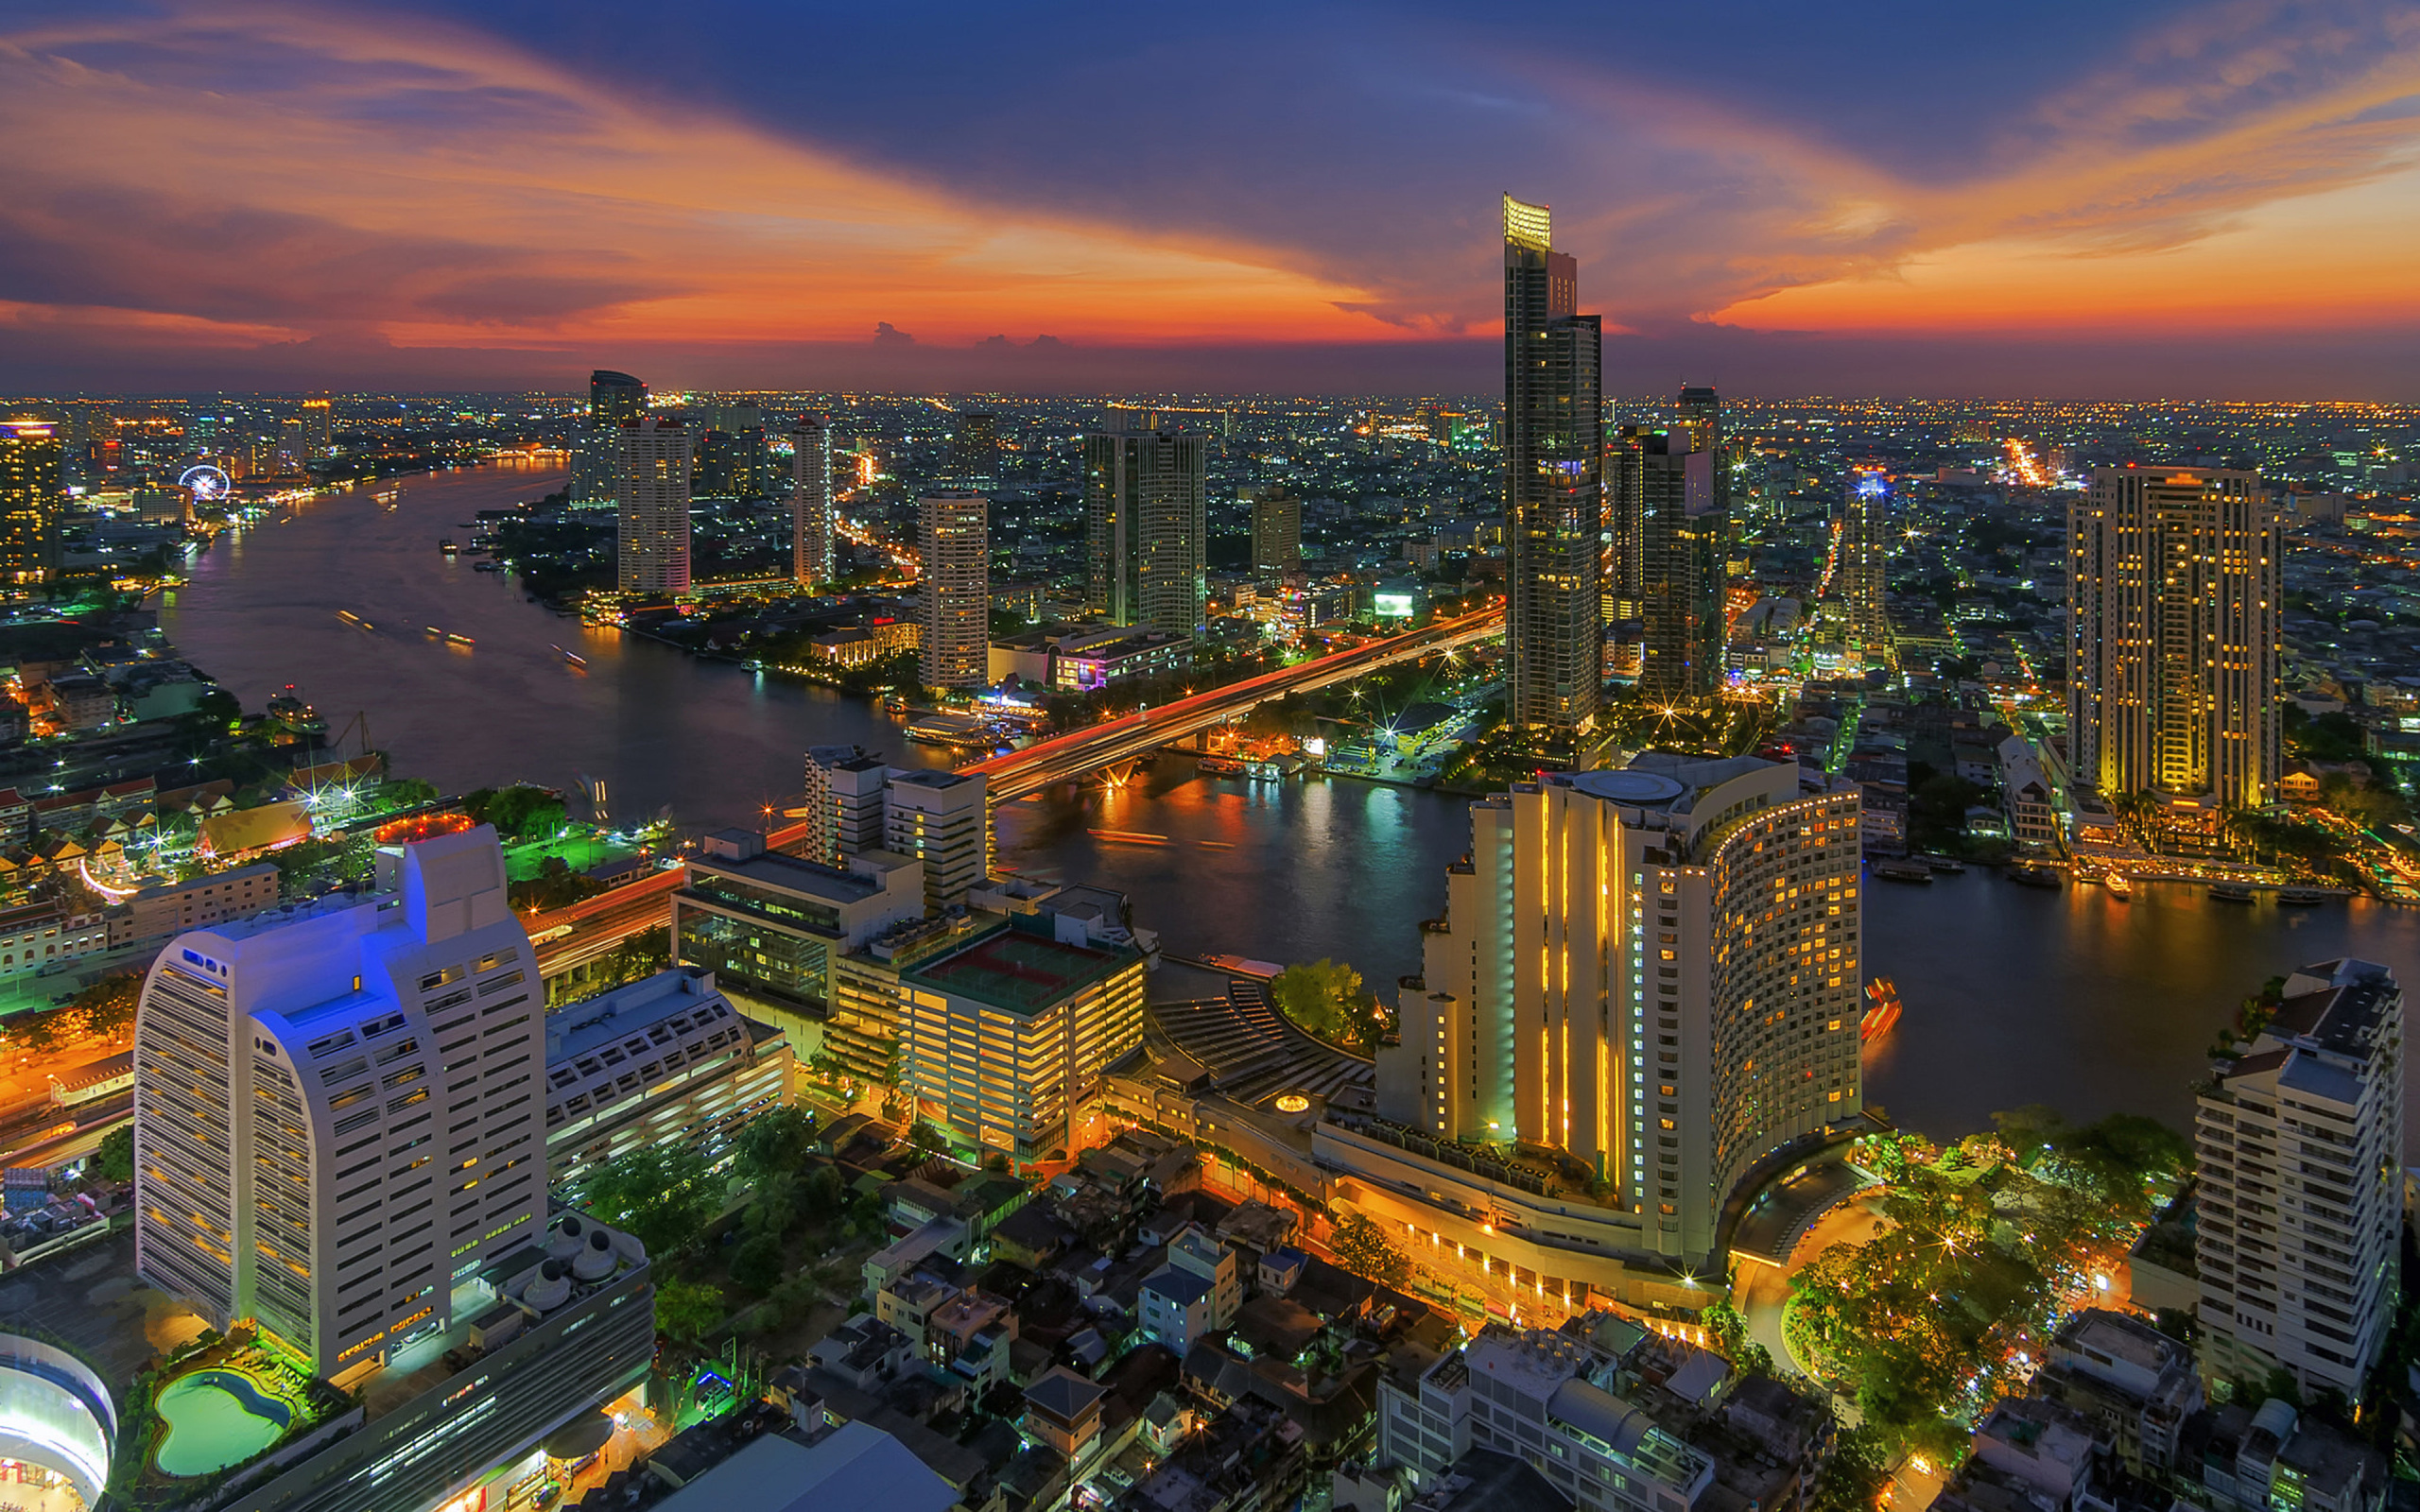 Bangkok: One of Asia's most cosmopolitan cities with magnificent temples and palaces, authentic canals, busy markets, and a vibrant nightlife that has something for everyone. 2560x1600 HD Background.